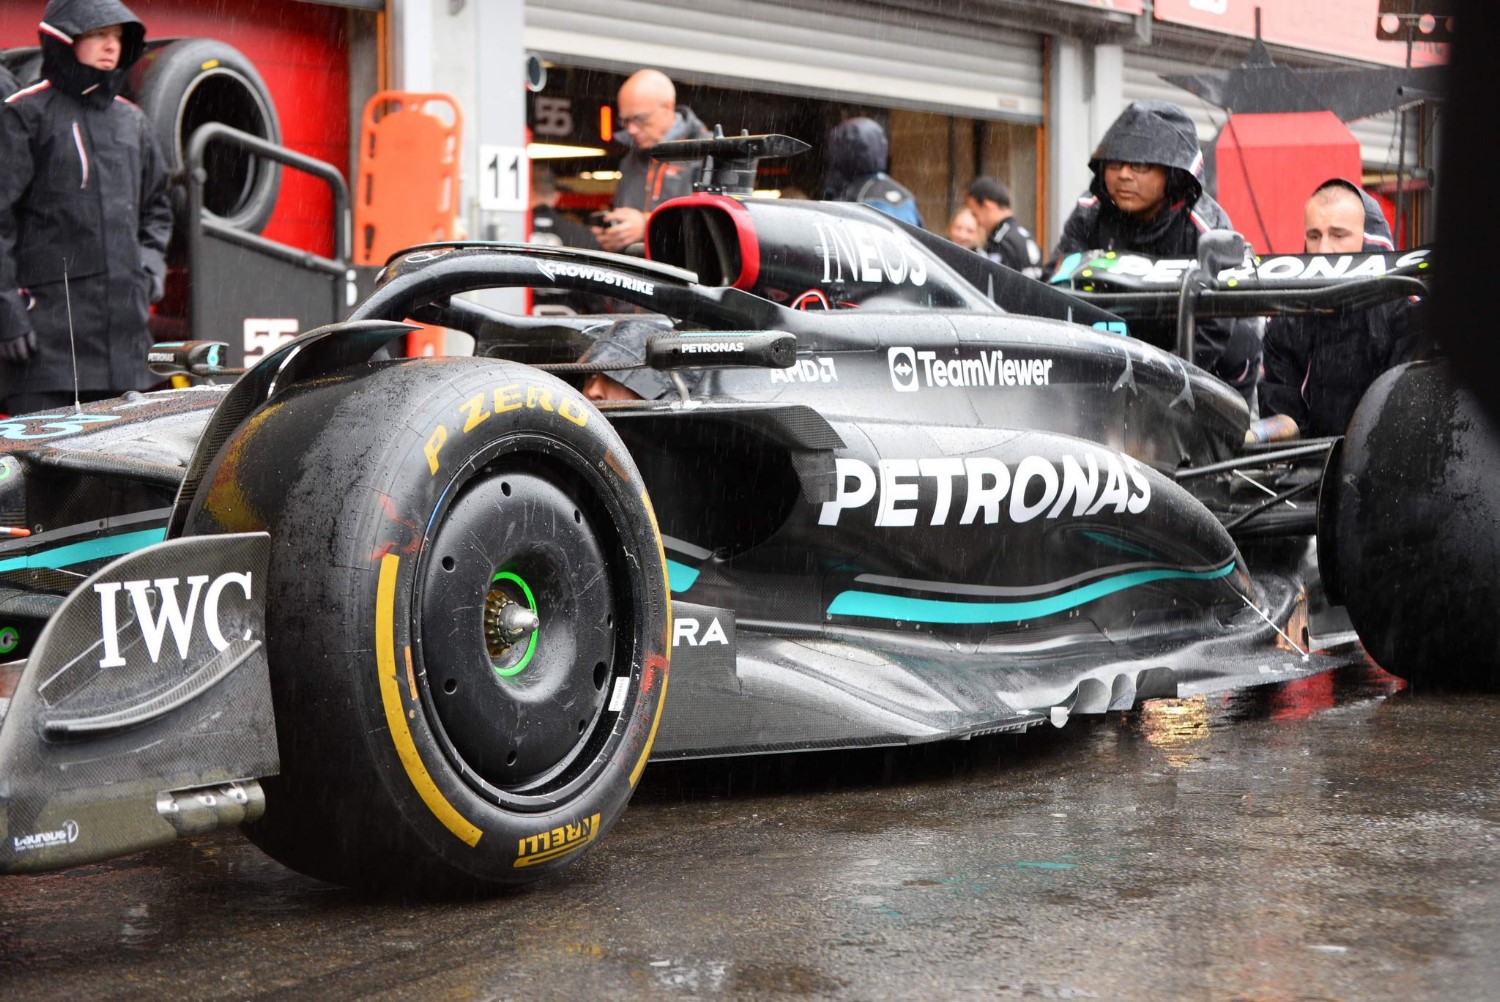 Where is Mercedes hiding the cost to bring all the in-season upgrades they have done? Here in Spa they are throwing the kitchen sink at the car -new Sidepods, Engine Cover, Floor, and Rear Wing. Many think they are cheating with their cost accounting.